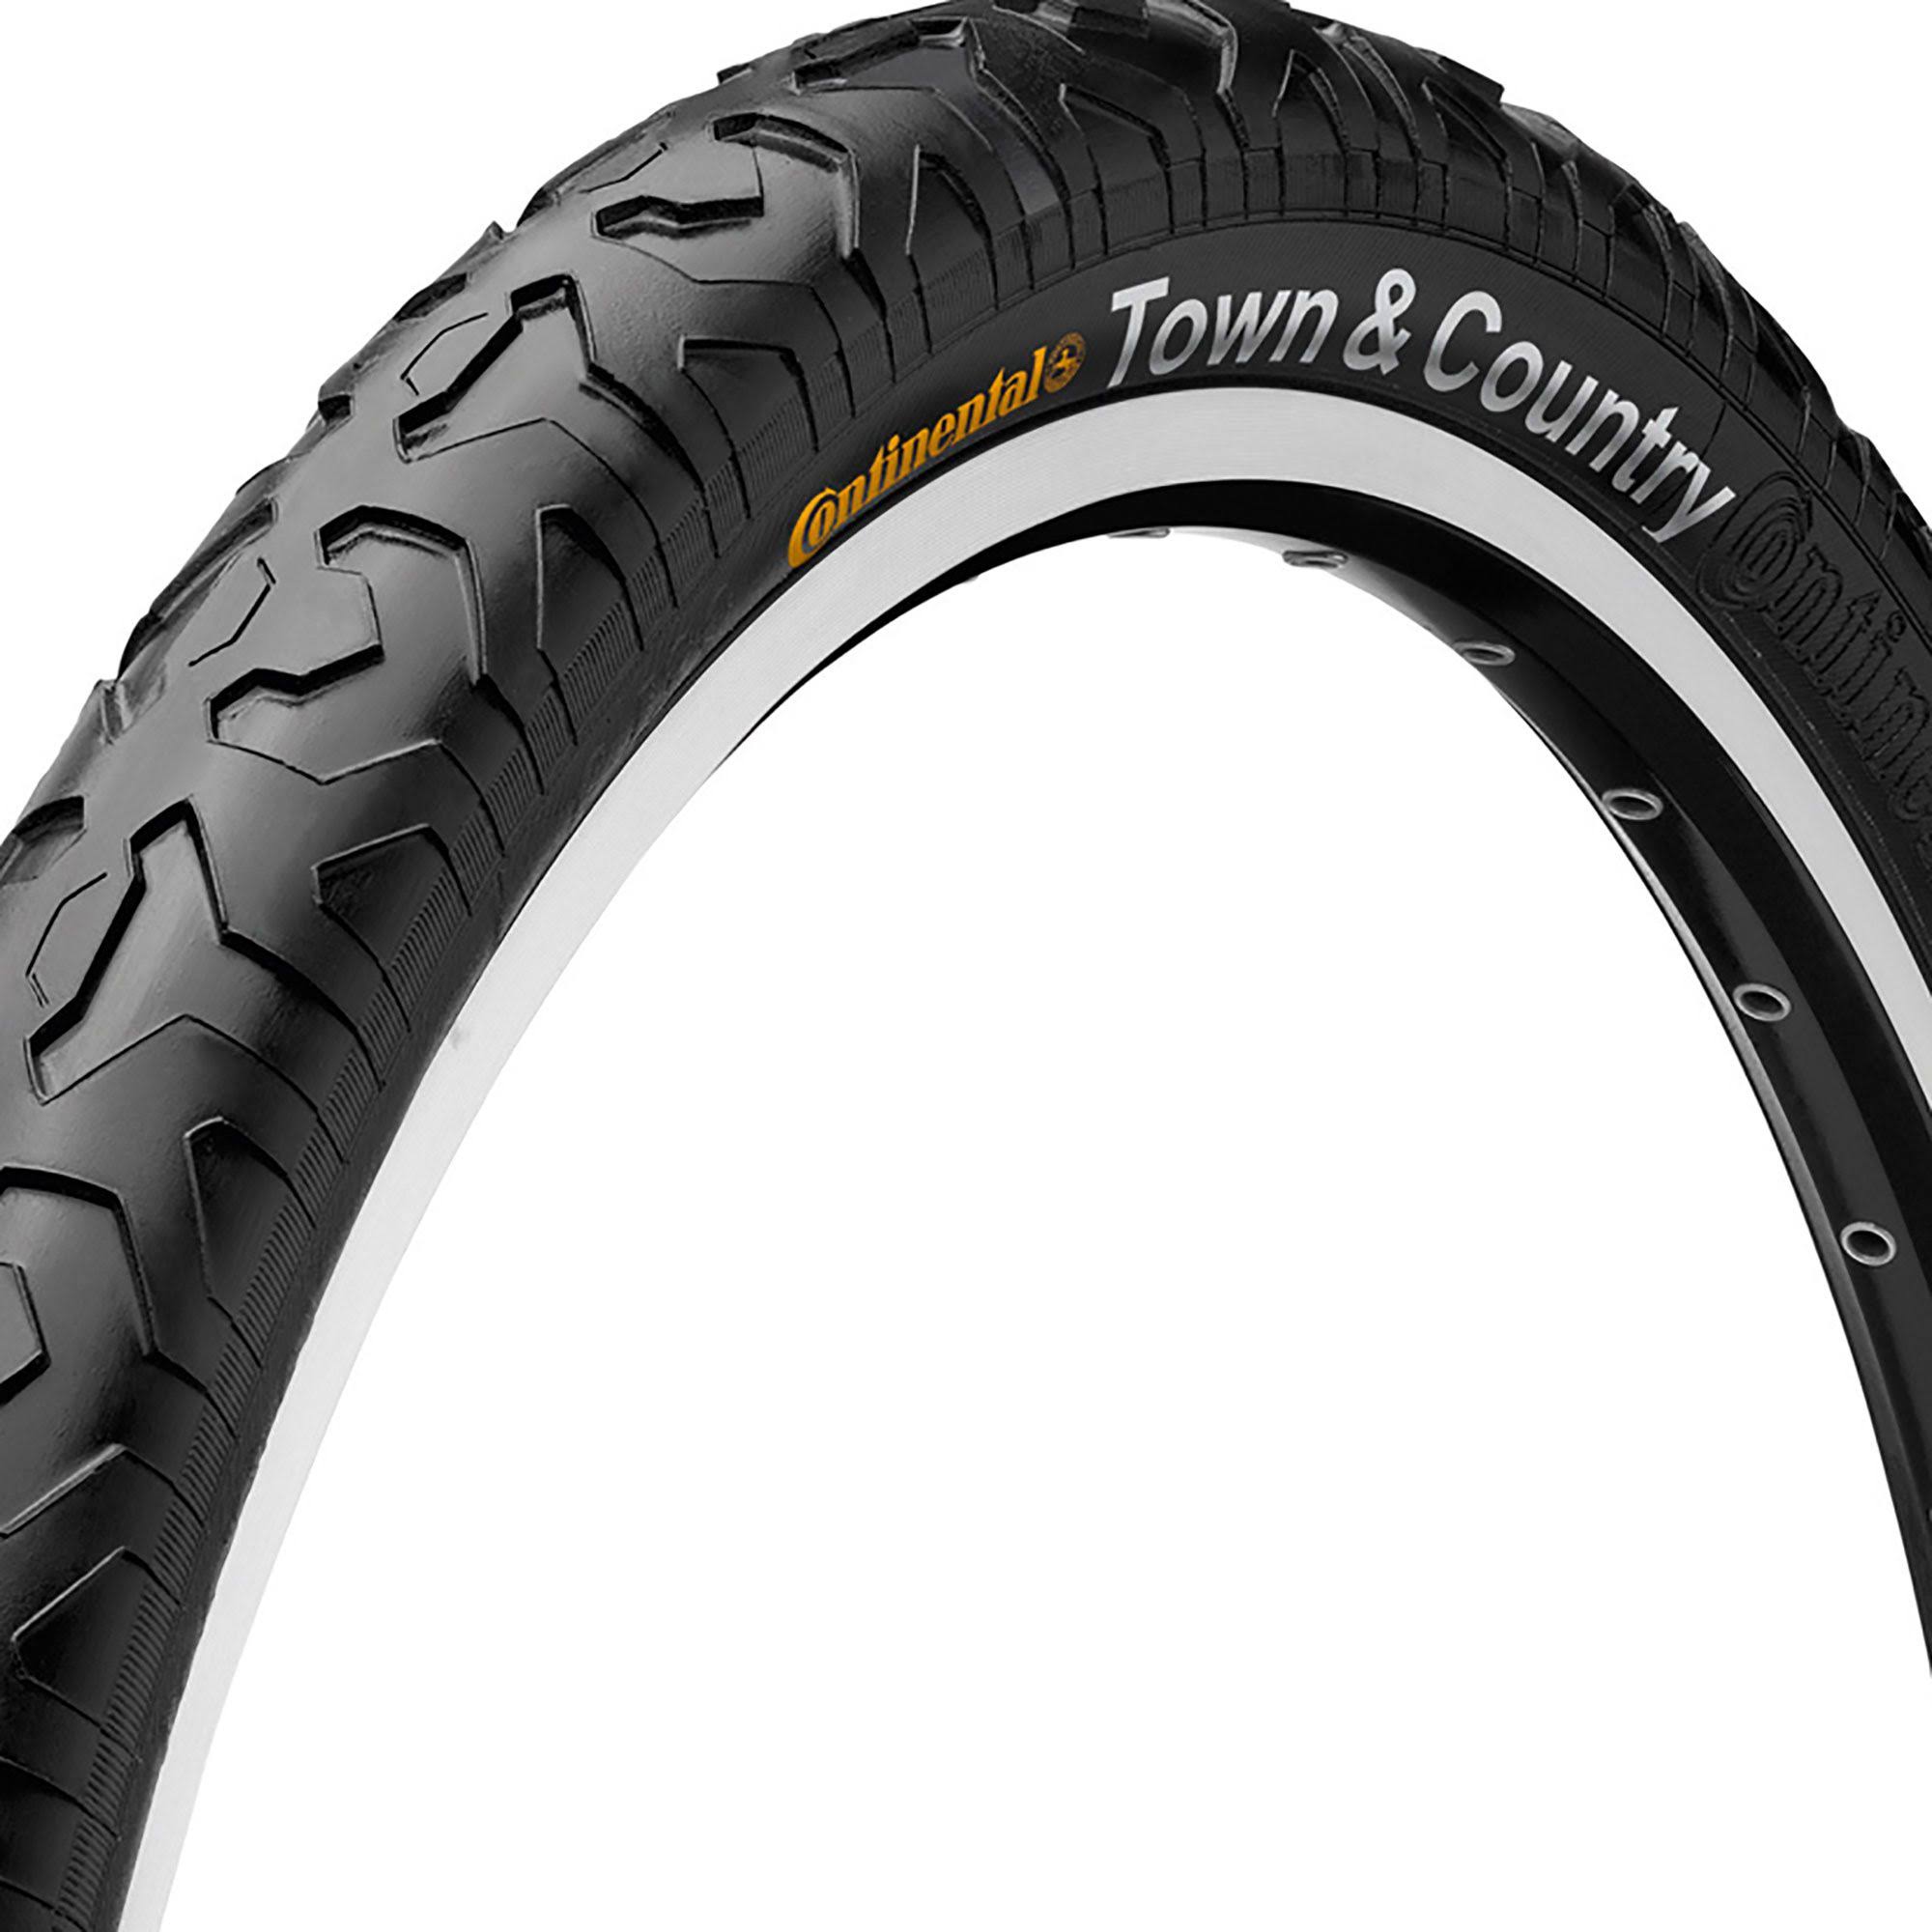 Continental Town & Country Urban Bicycle Tyre - 26" x 1.9"